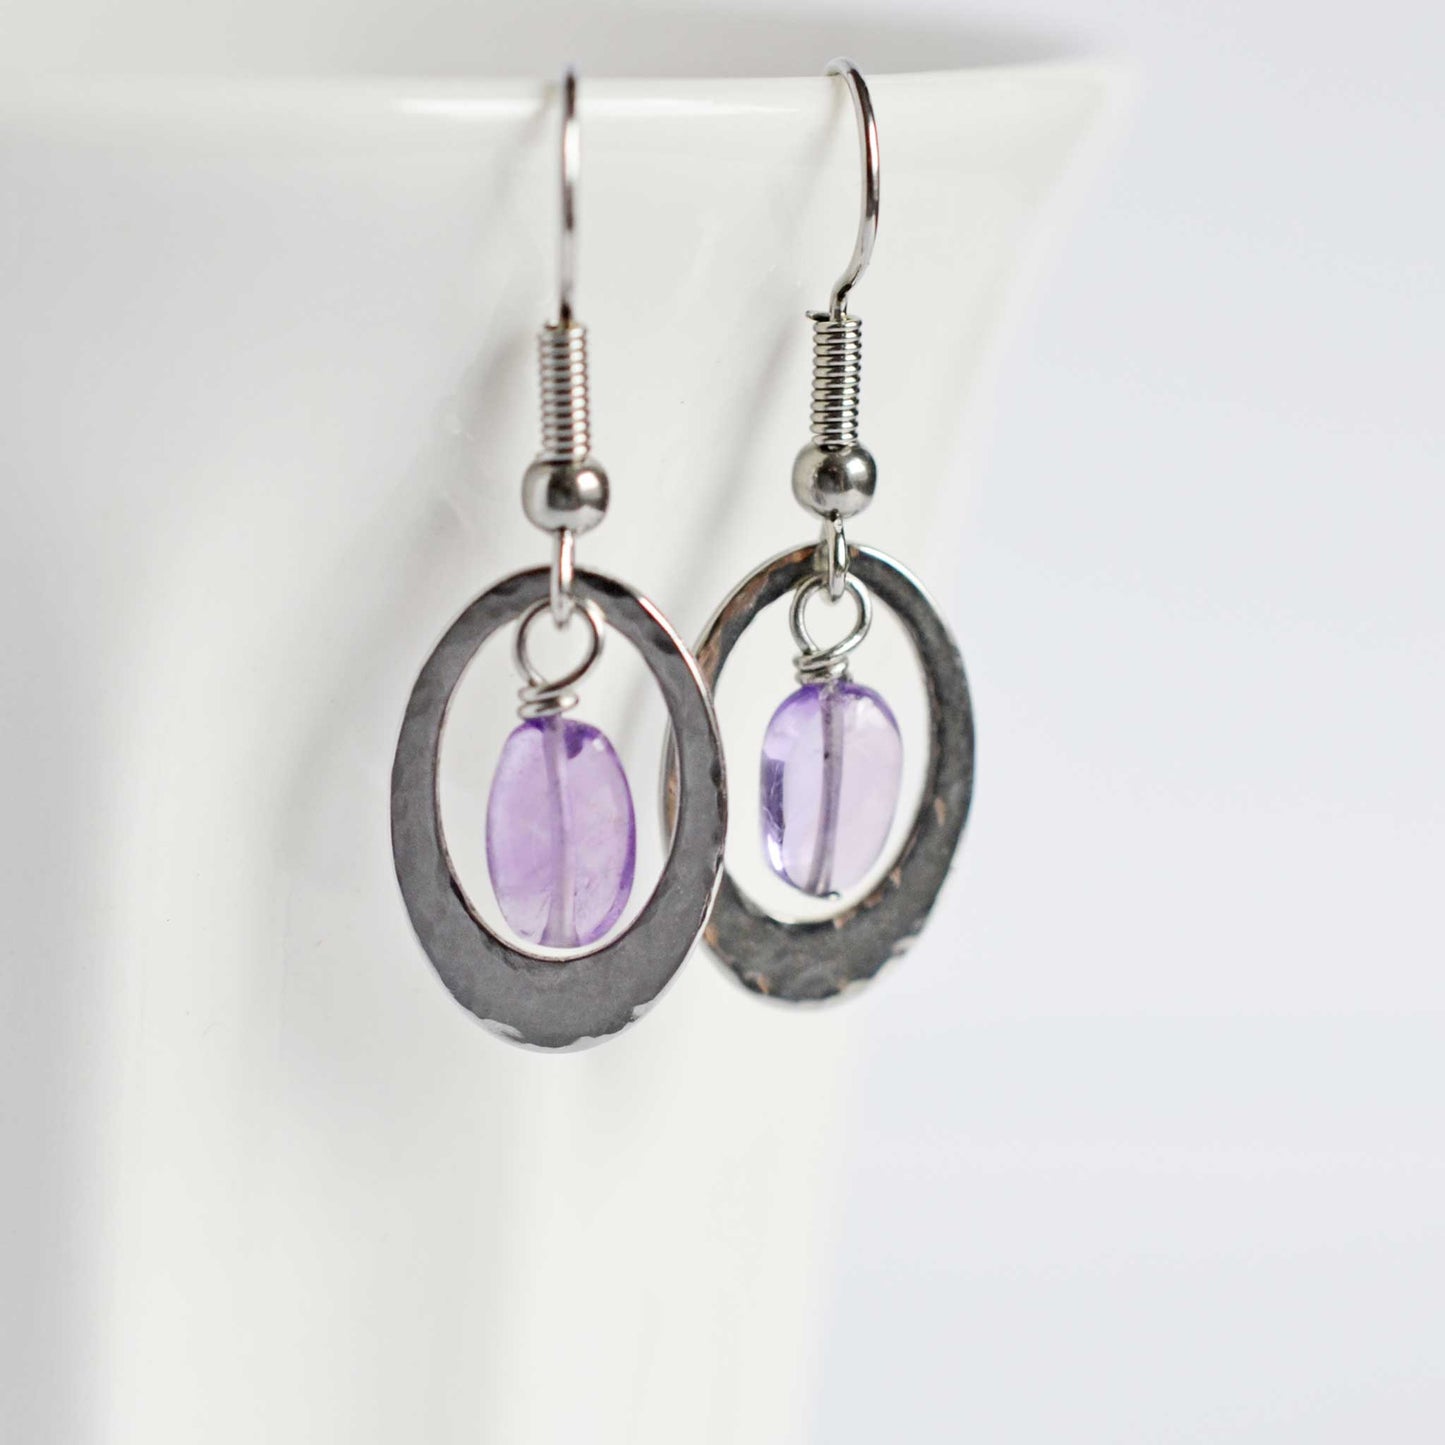 Hammered oval drop earrings with central Amethyst gemstone hanging on white cup.